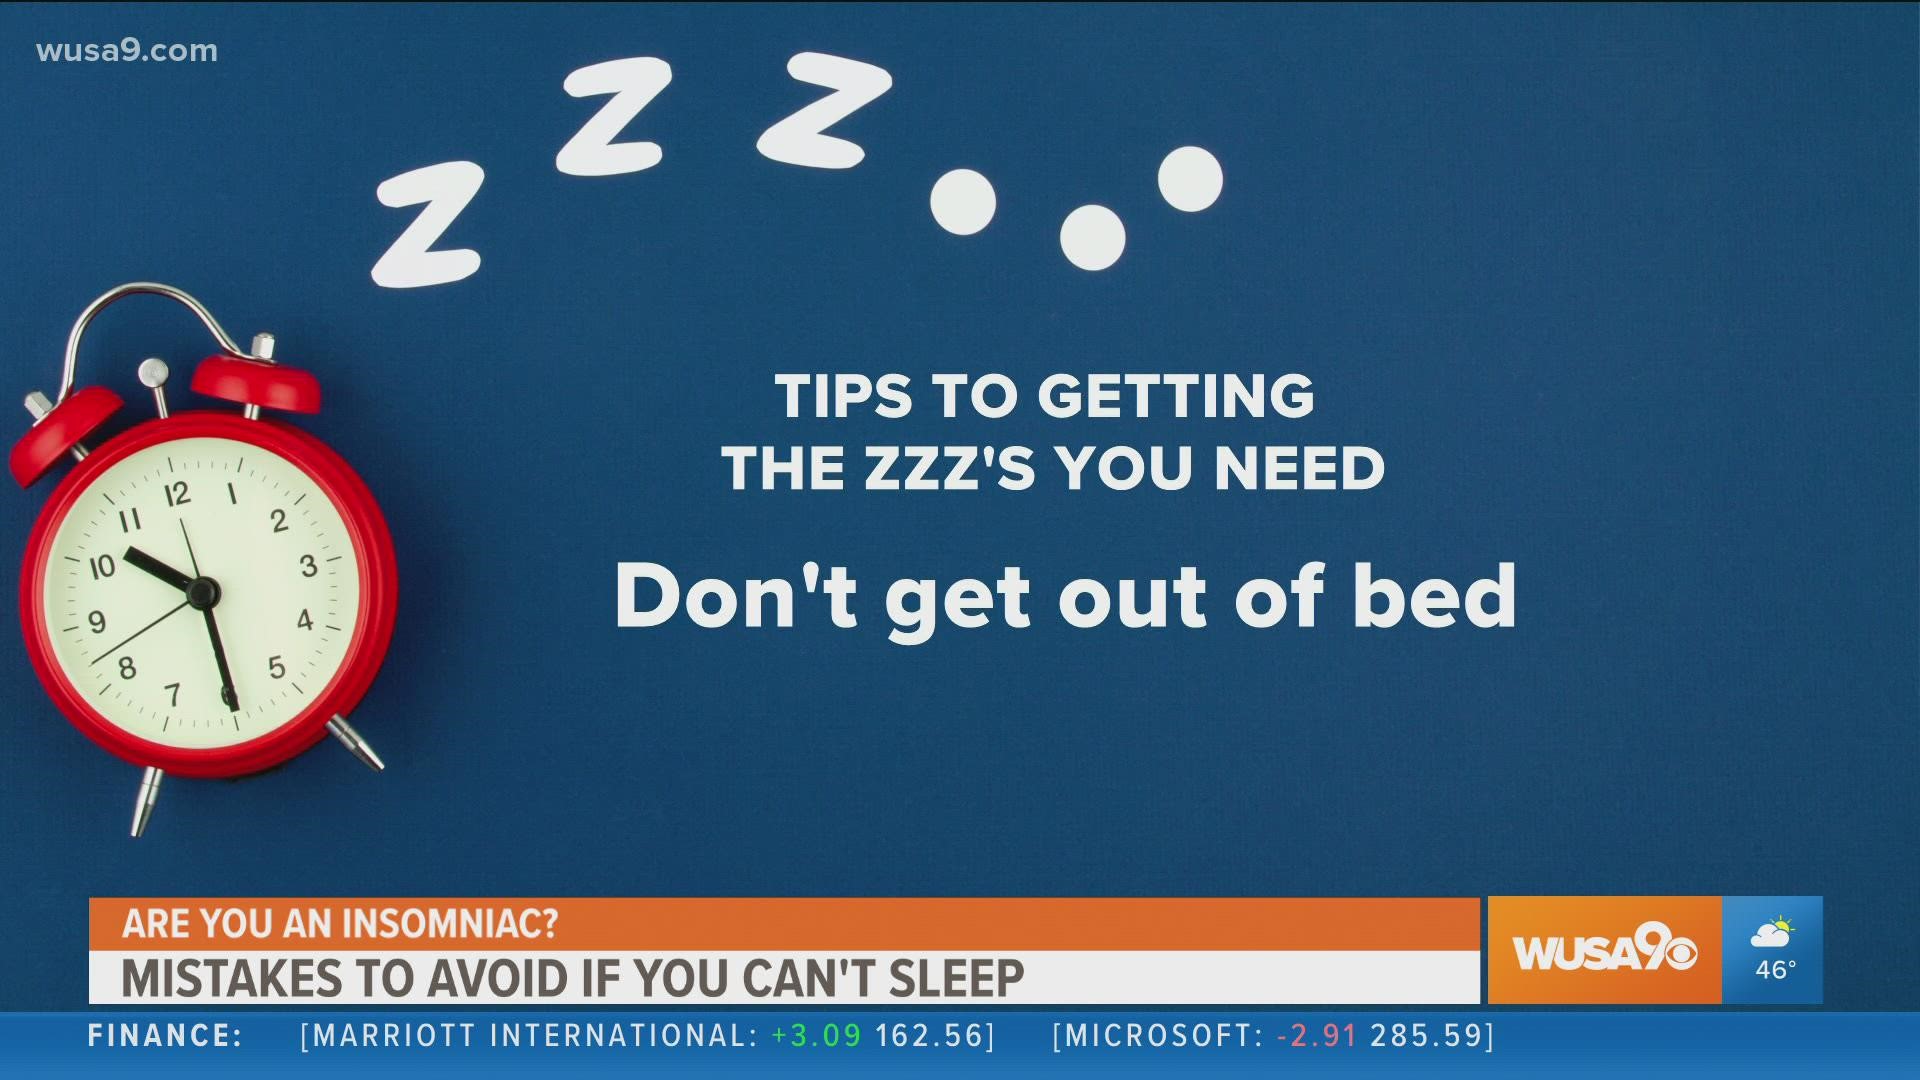 Aimee Duffy, MD, author of "Normal Doesn't Have Side Effects" shares some tips on how to get a good 7 hours of sleep.